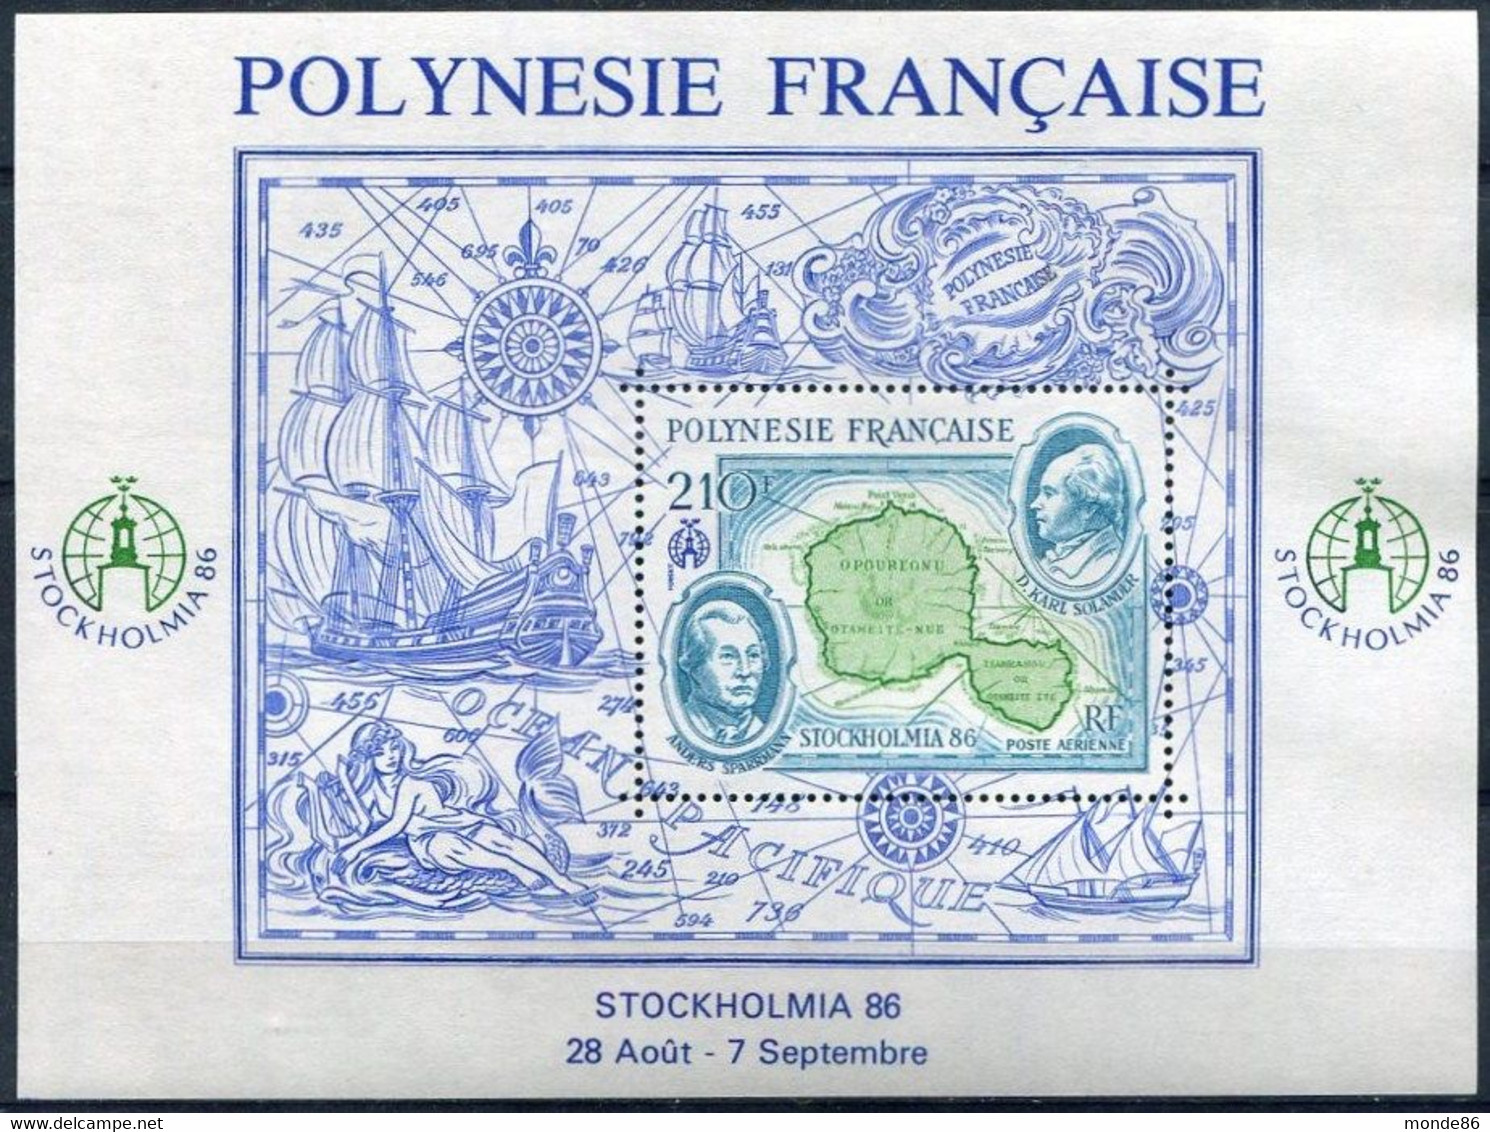 POLYNESIE FRANCAISE - Année Complète 1986 ** - BF + PA Inclus - Full Years